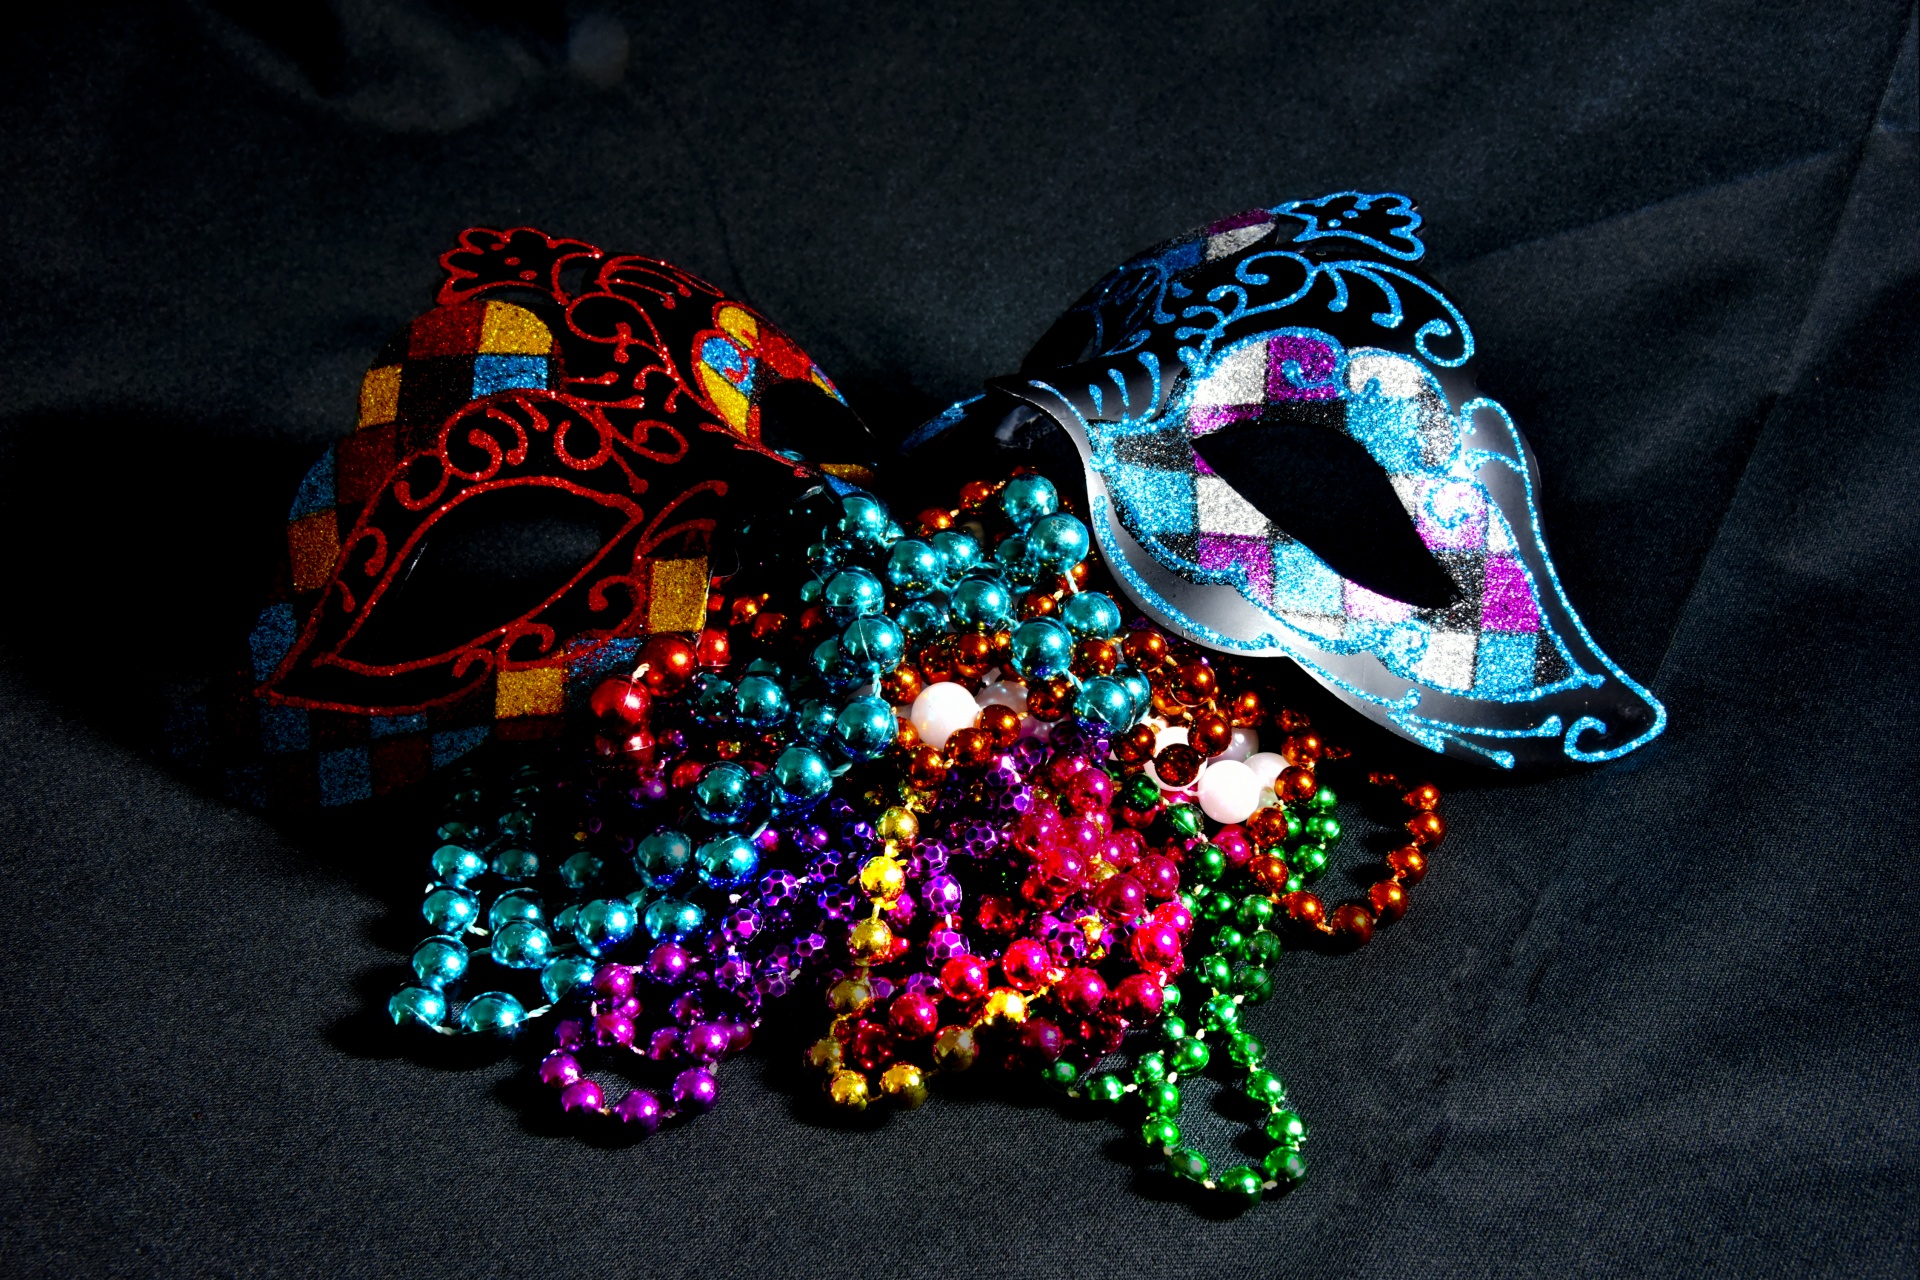 Carnival mask and Mardi Gras beads on a black background